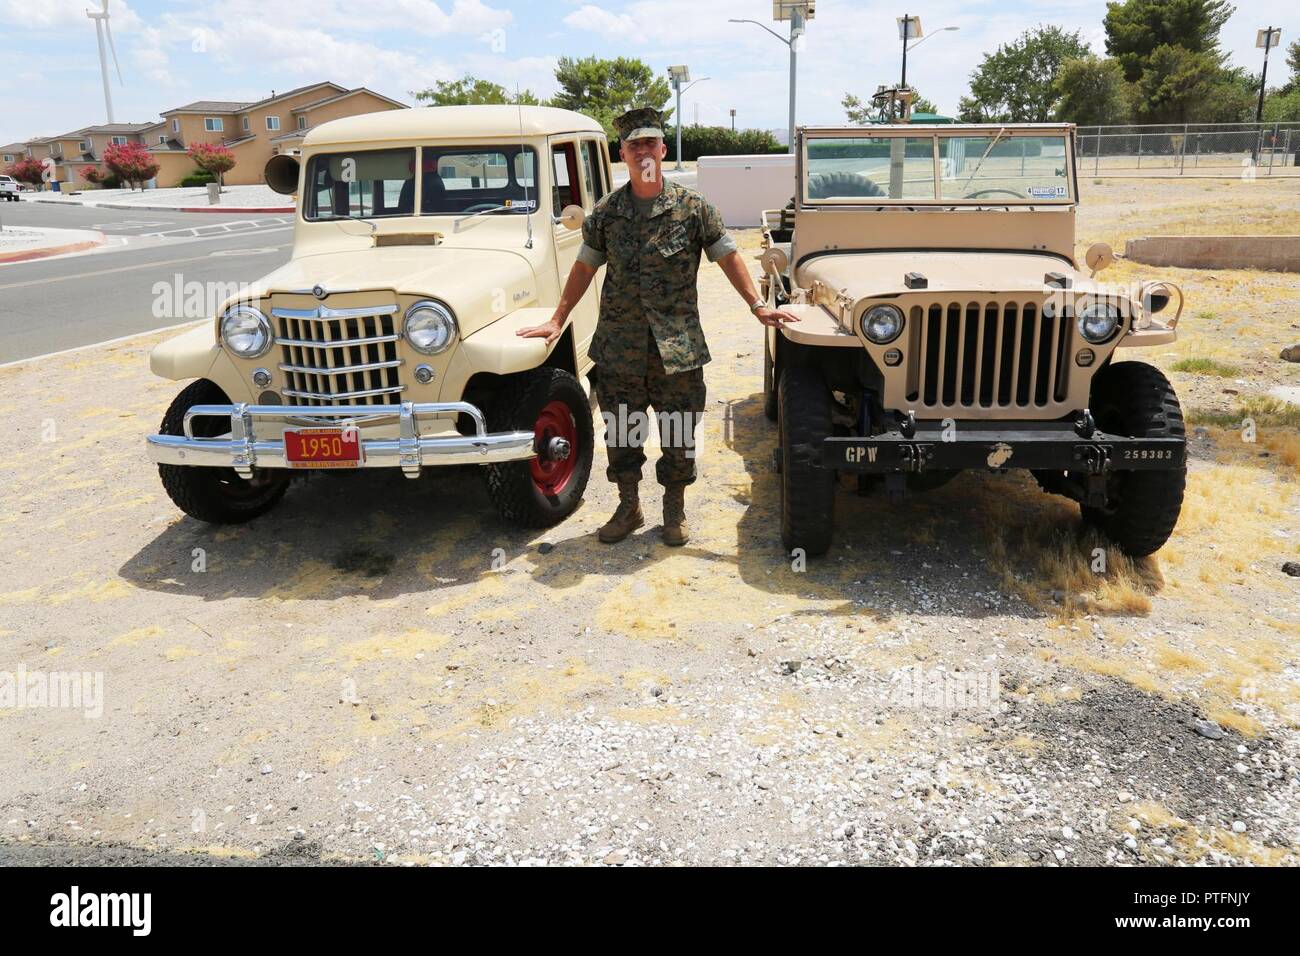 History buff and car enthusiast, Lt.Col. Timothy Silkowski, shows off his ‘40s era Ford Jeep and the 1950 Willys Station Wagon that he has restored over the course of his Marine Corps career. Both vehicles have identical, 134 cubic inch, 60 horsepower, 105 foot pounds of torque, 4 cylinder engines. The Willys-Overland Motor Company and Ford both produced Jeeps for World War II use with the station wagon rising out of a need to use up thousands of surplus engines once the war ended. Stock Photo